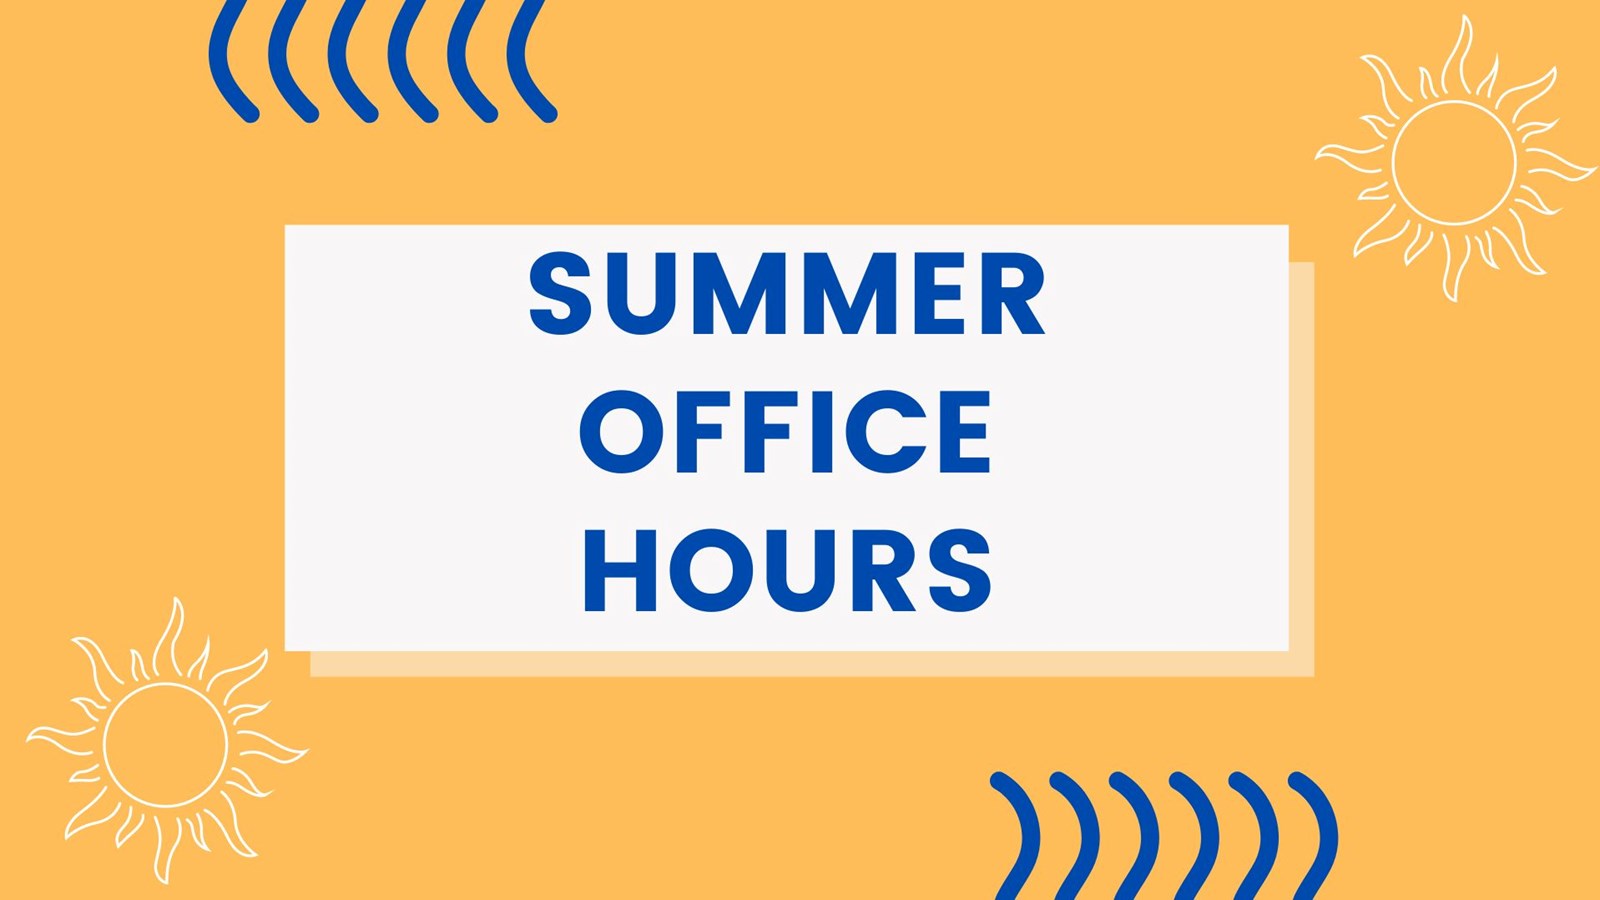 SUMMER OFFICE HOURS 23